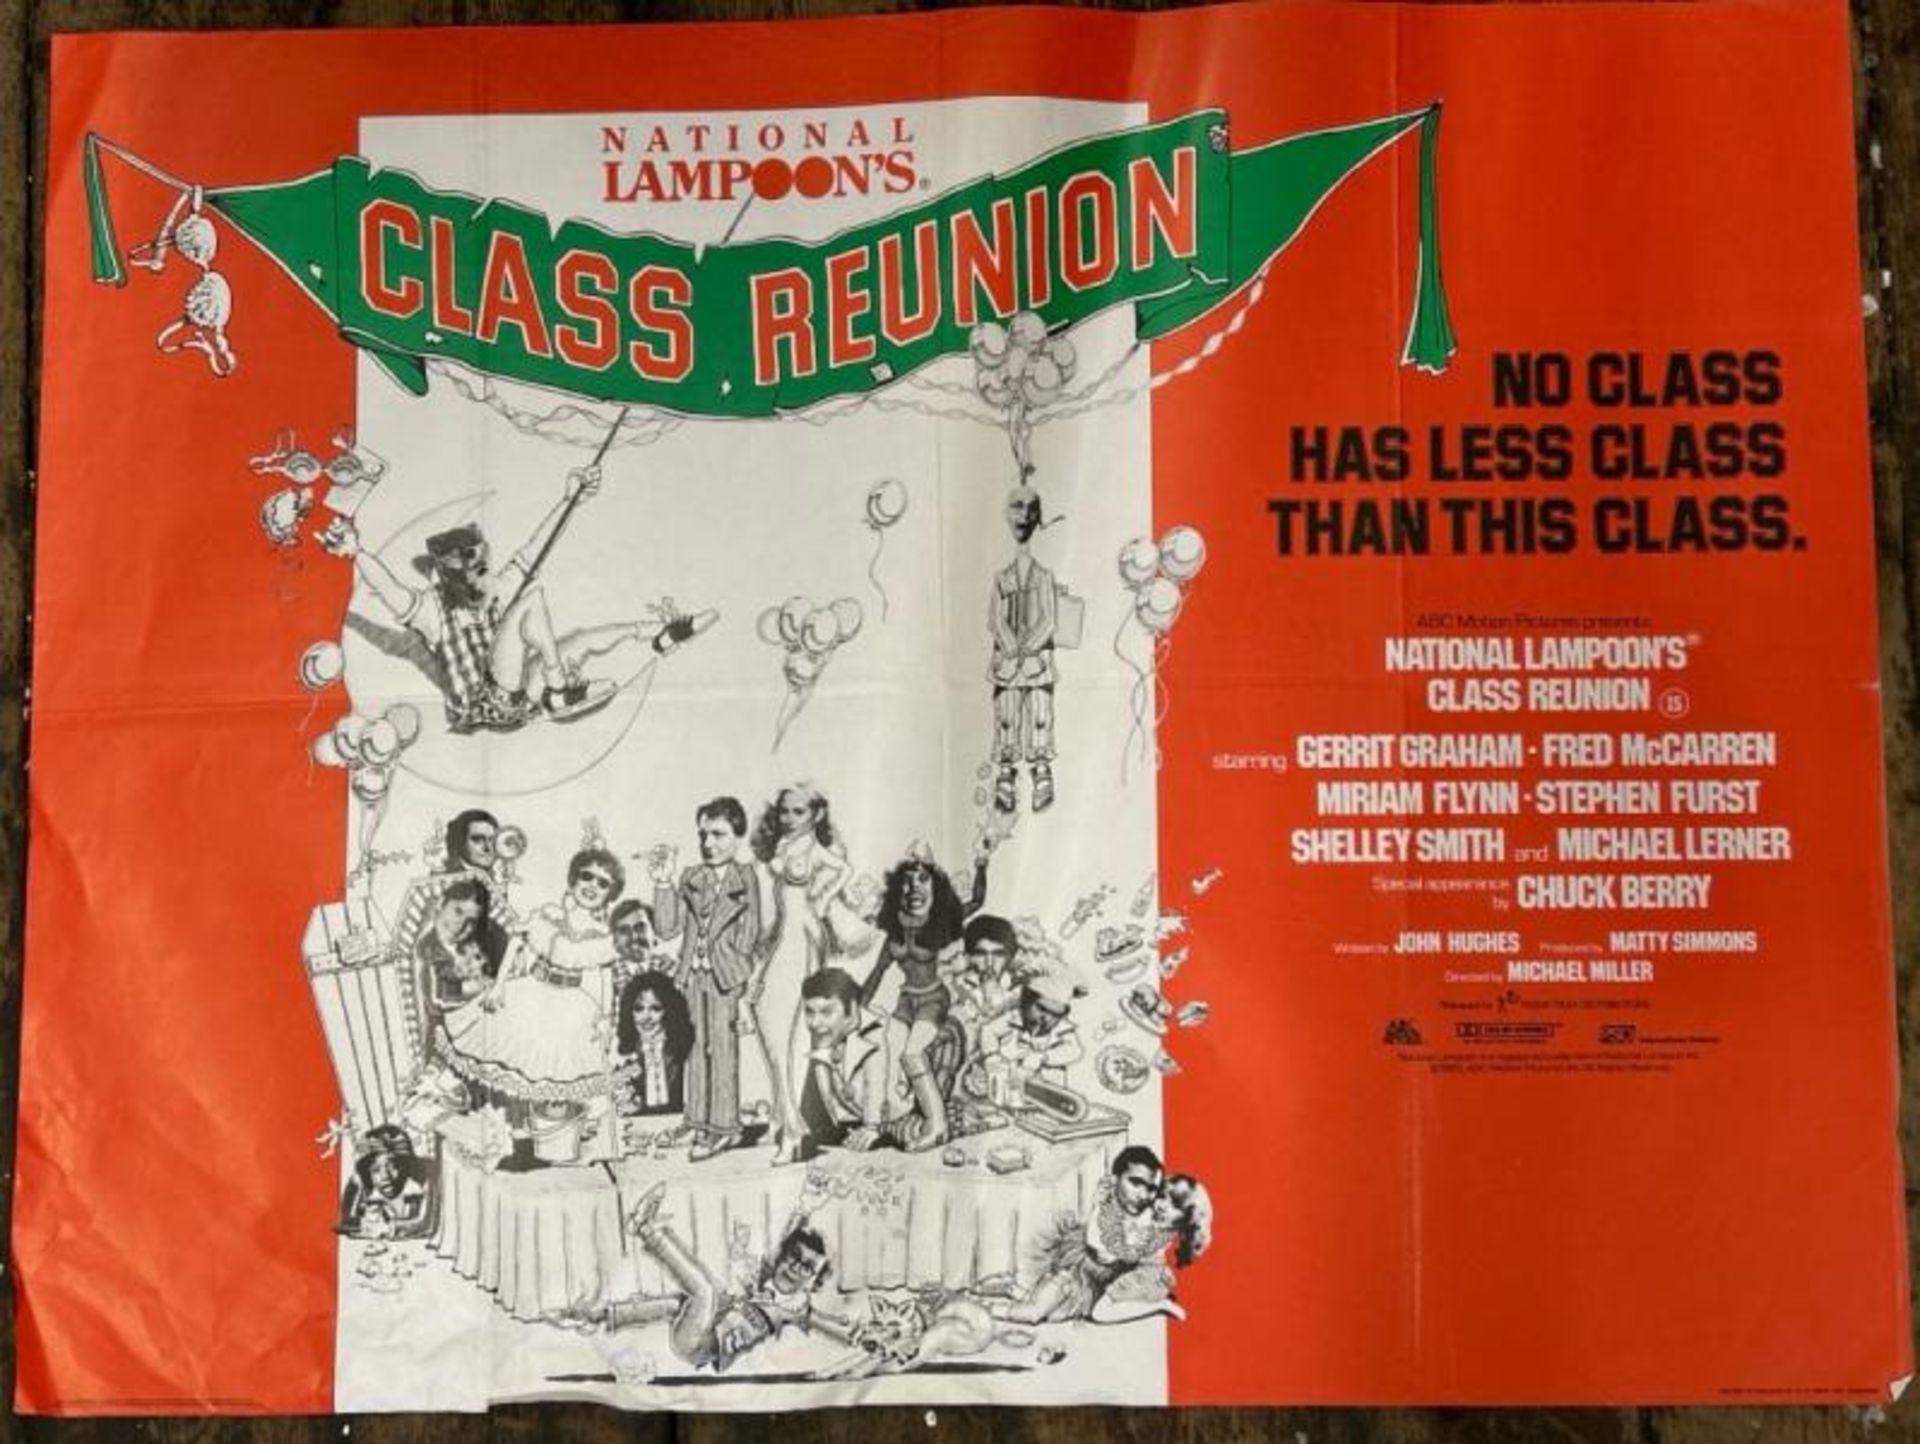 NATIONAL LAMPOON'S CLASS REUNION, ORIGINAL FILM POSTER, PRINTED IN ENGLAND BY W. E. BERRY